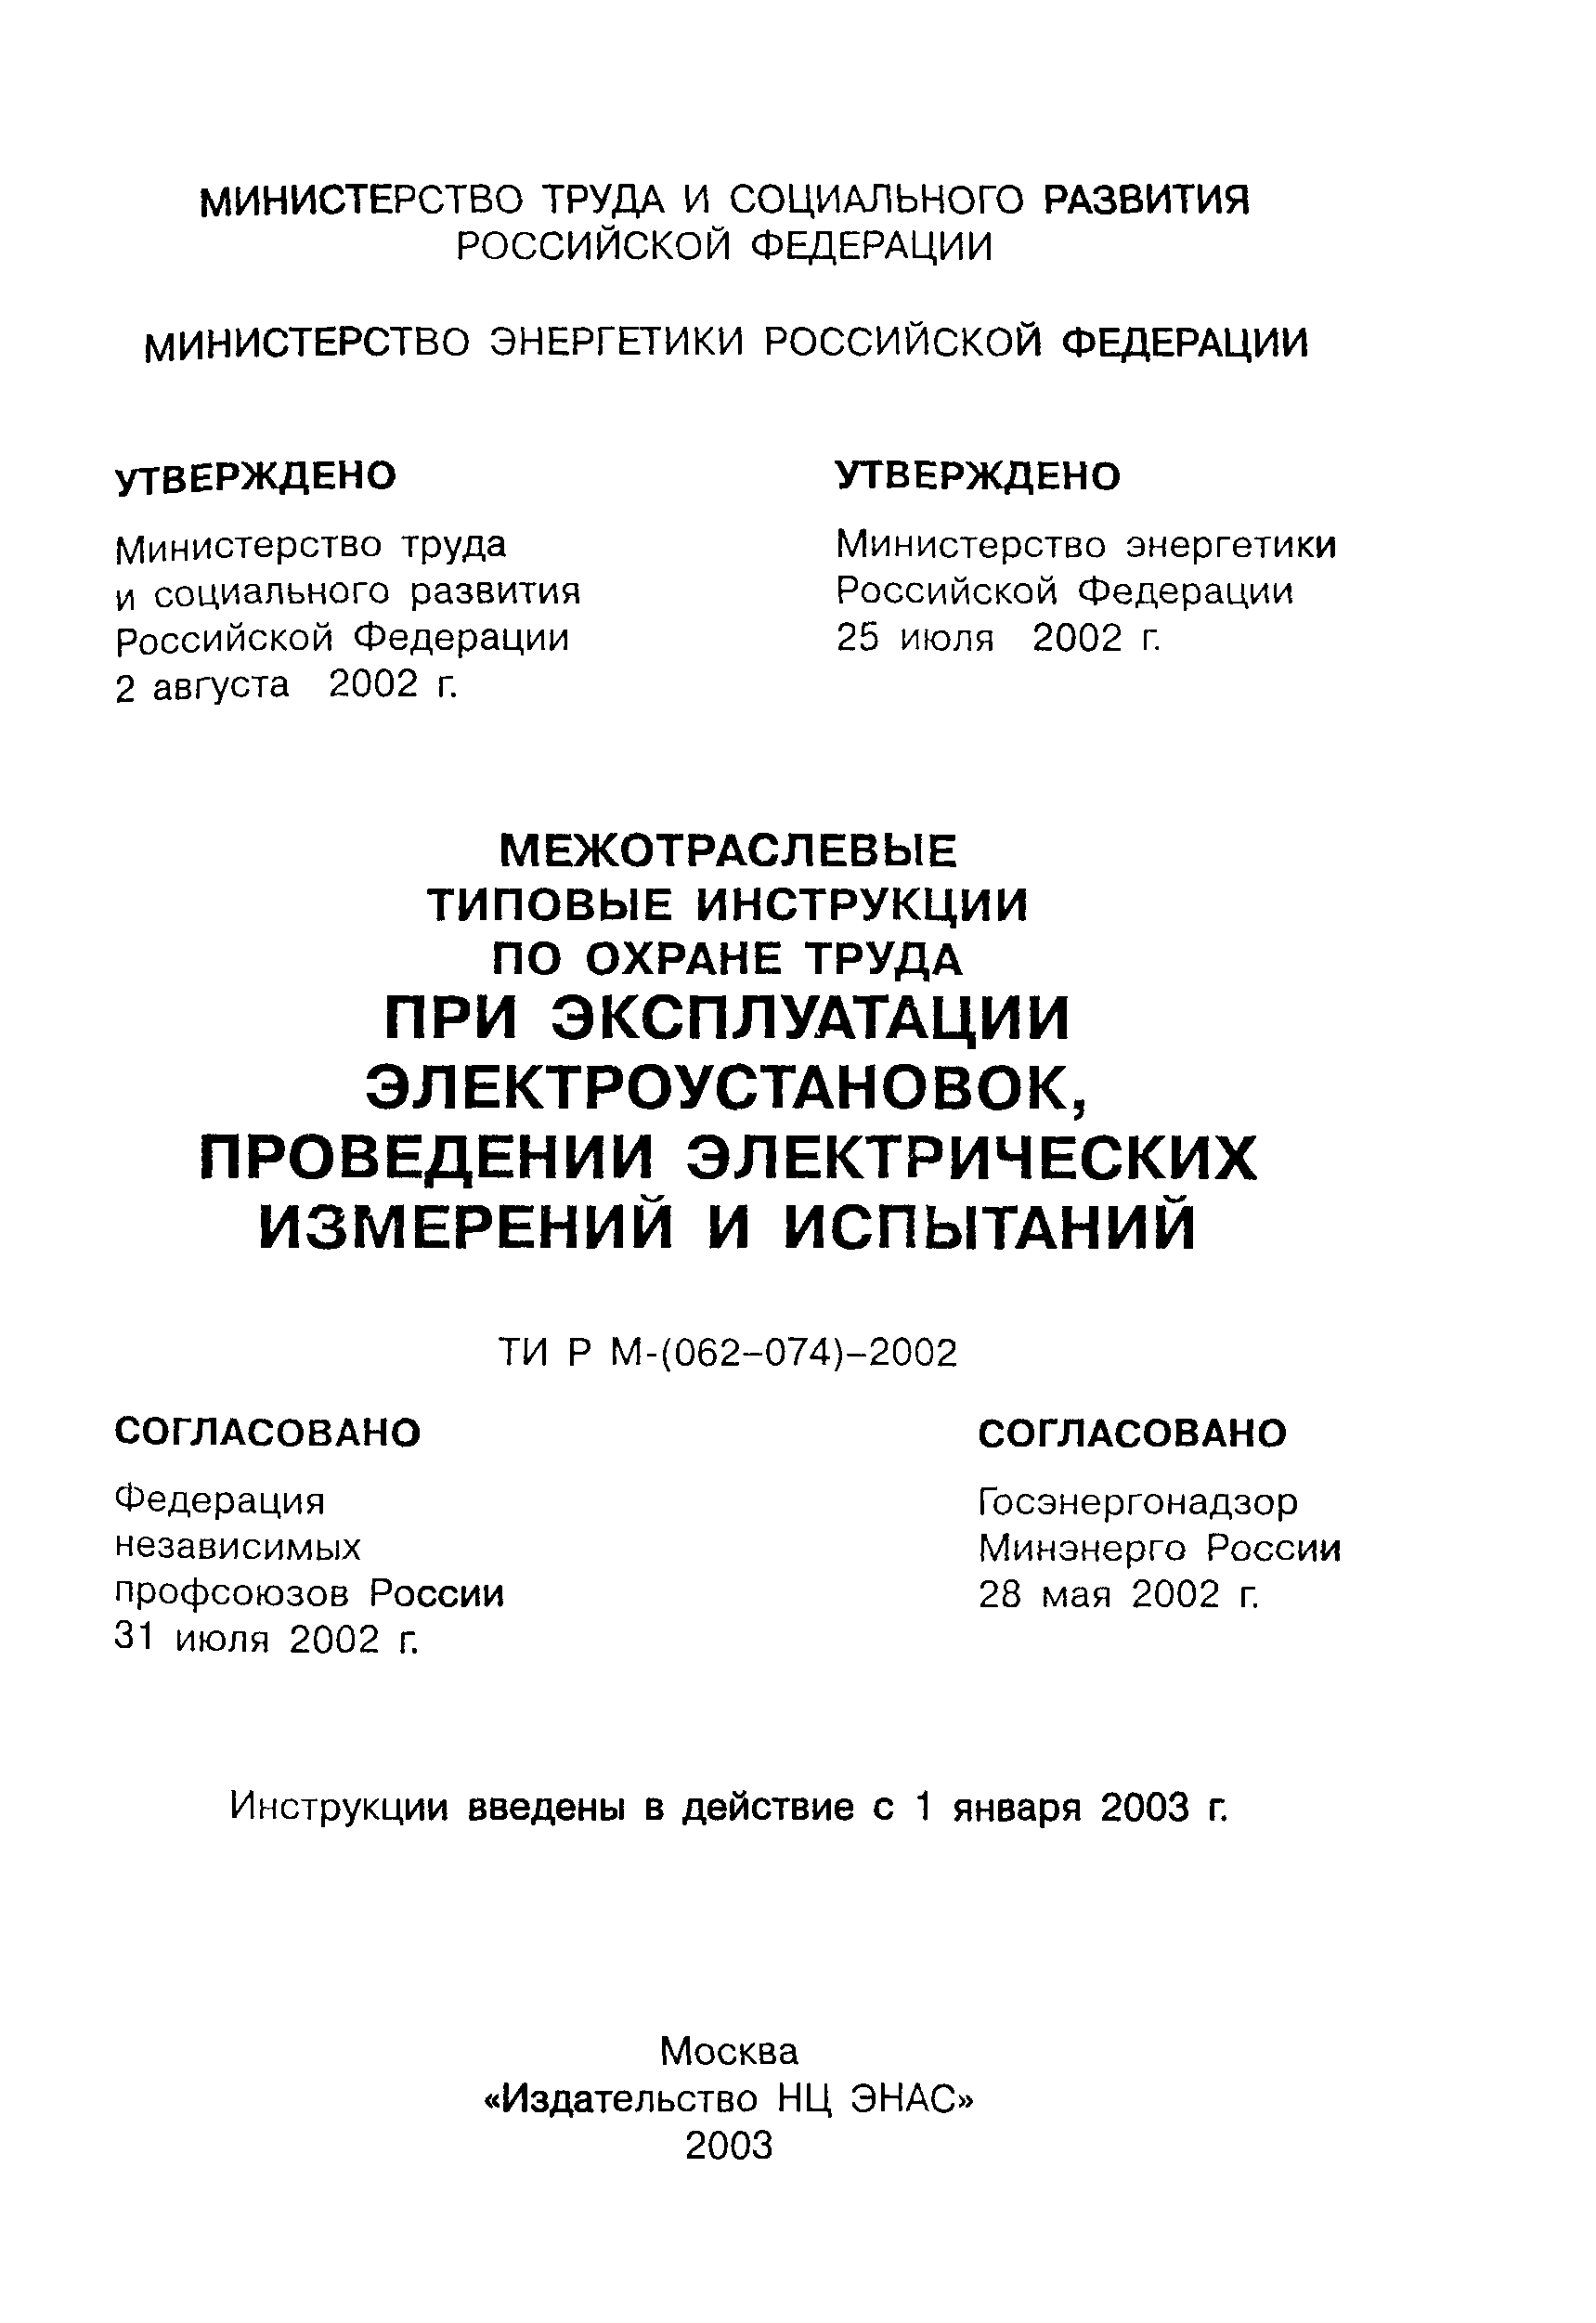 ТИ Р М-067-2002